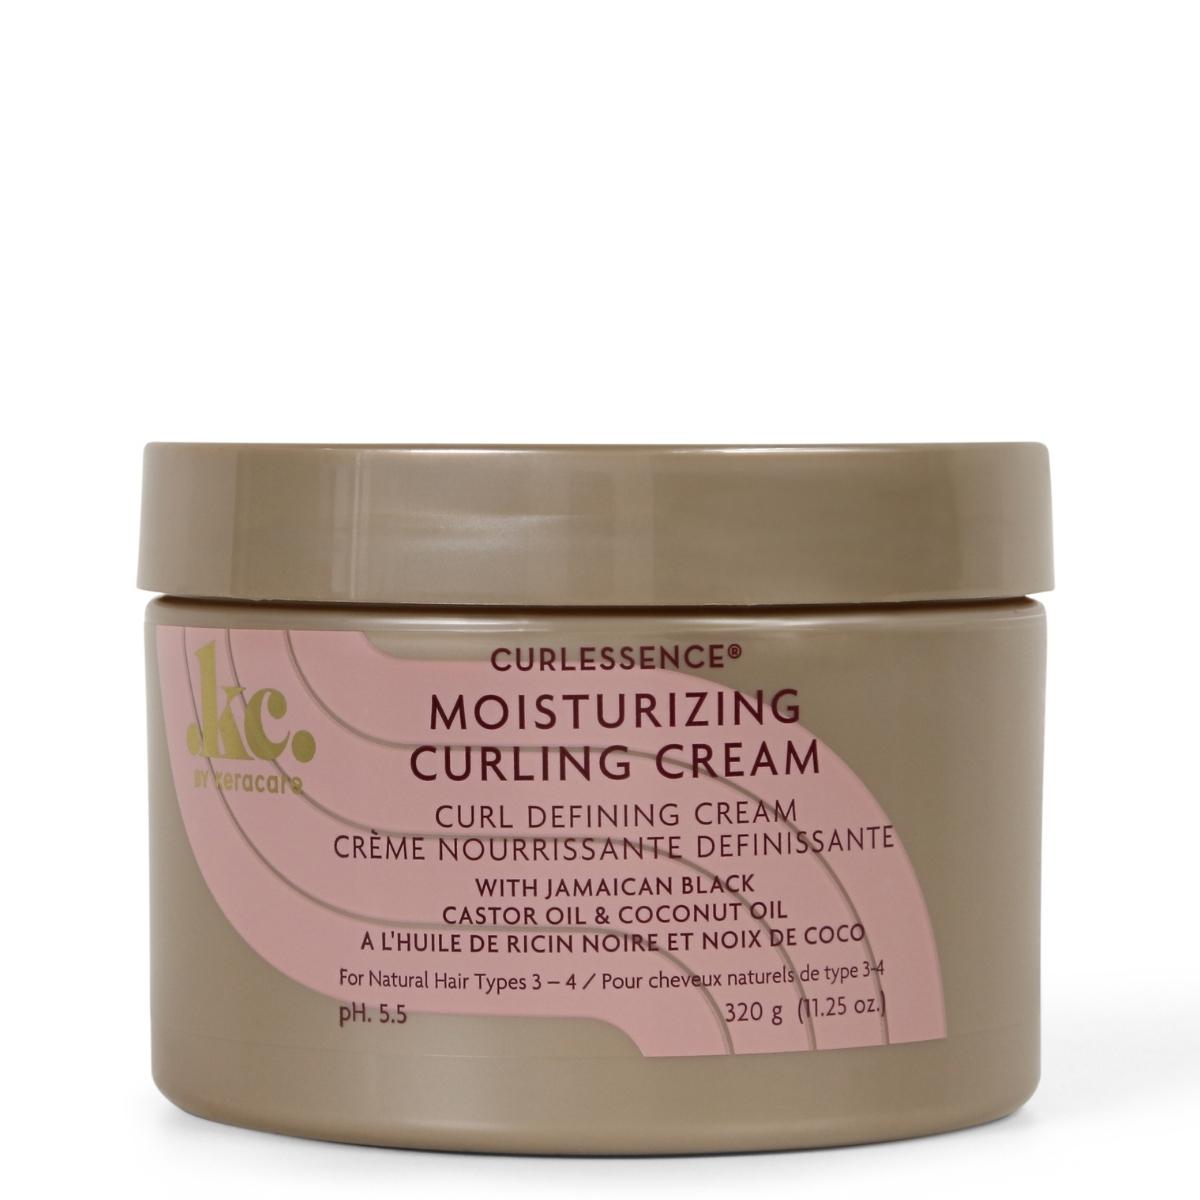 Curlessence by Keracare - Curling Cream - Crème coiffante (320g)